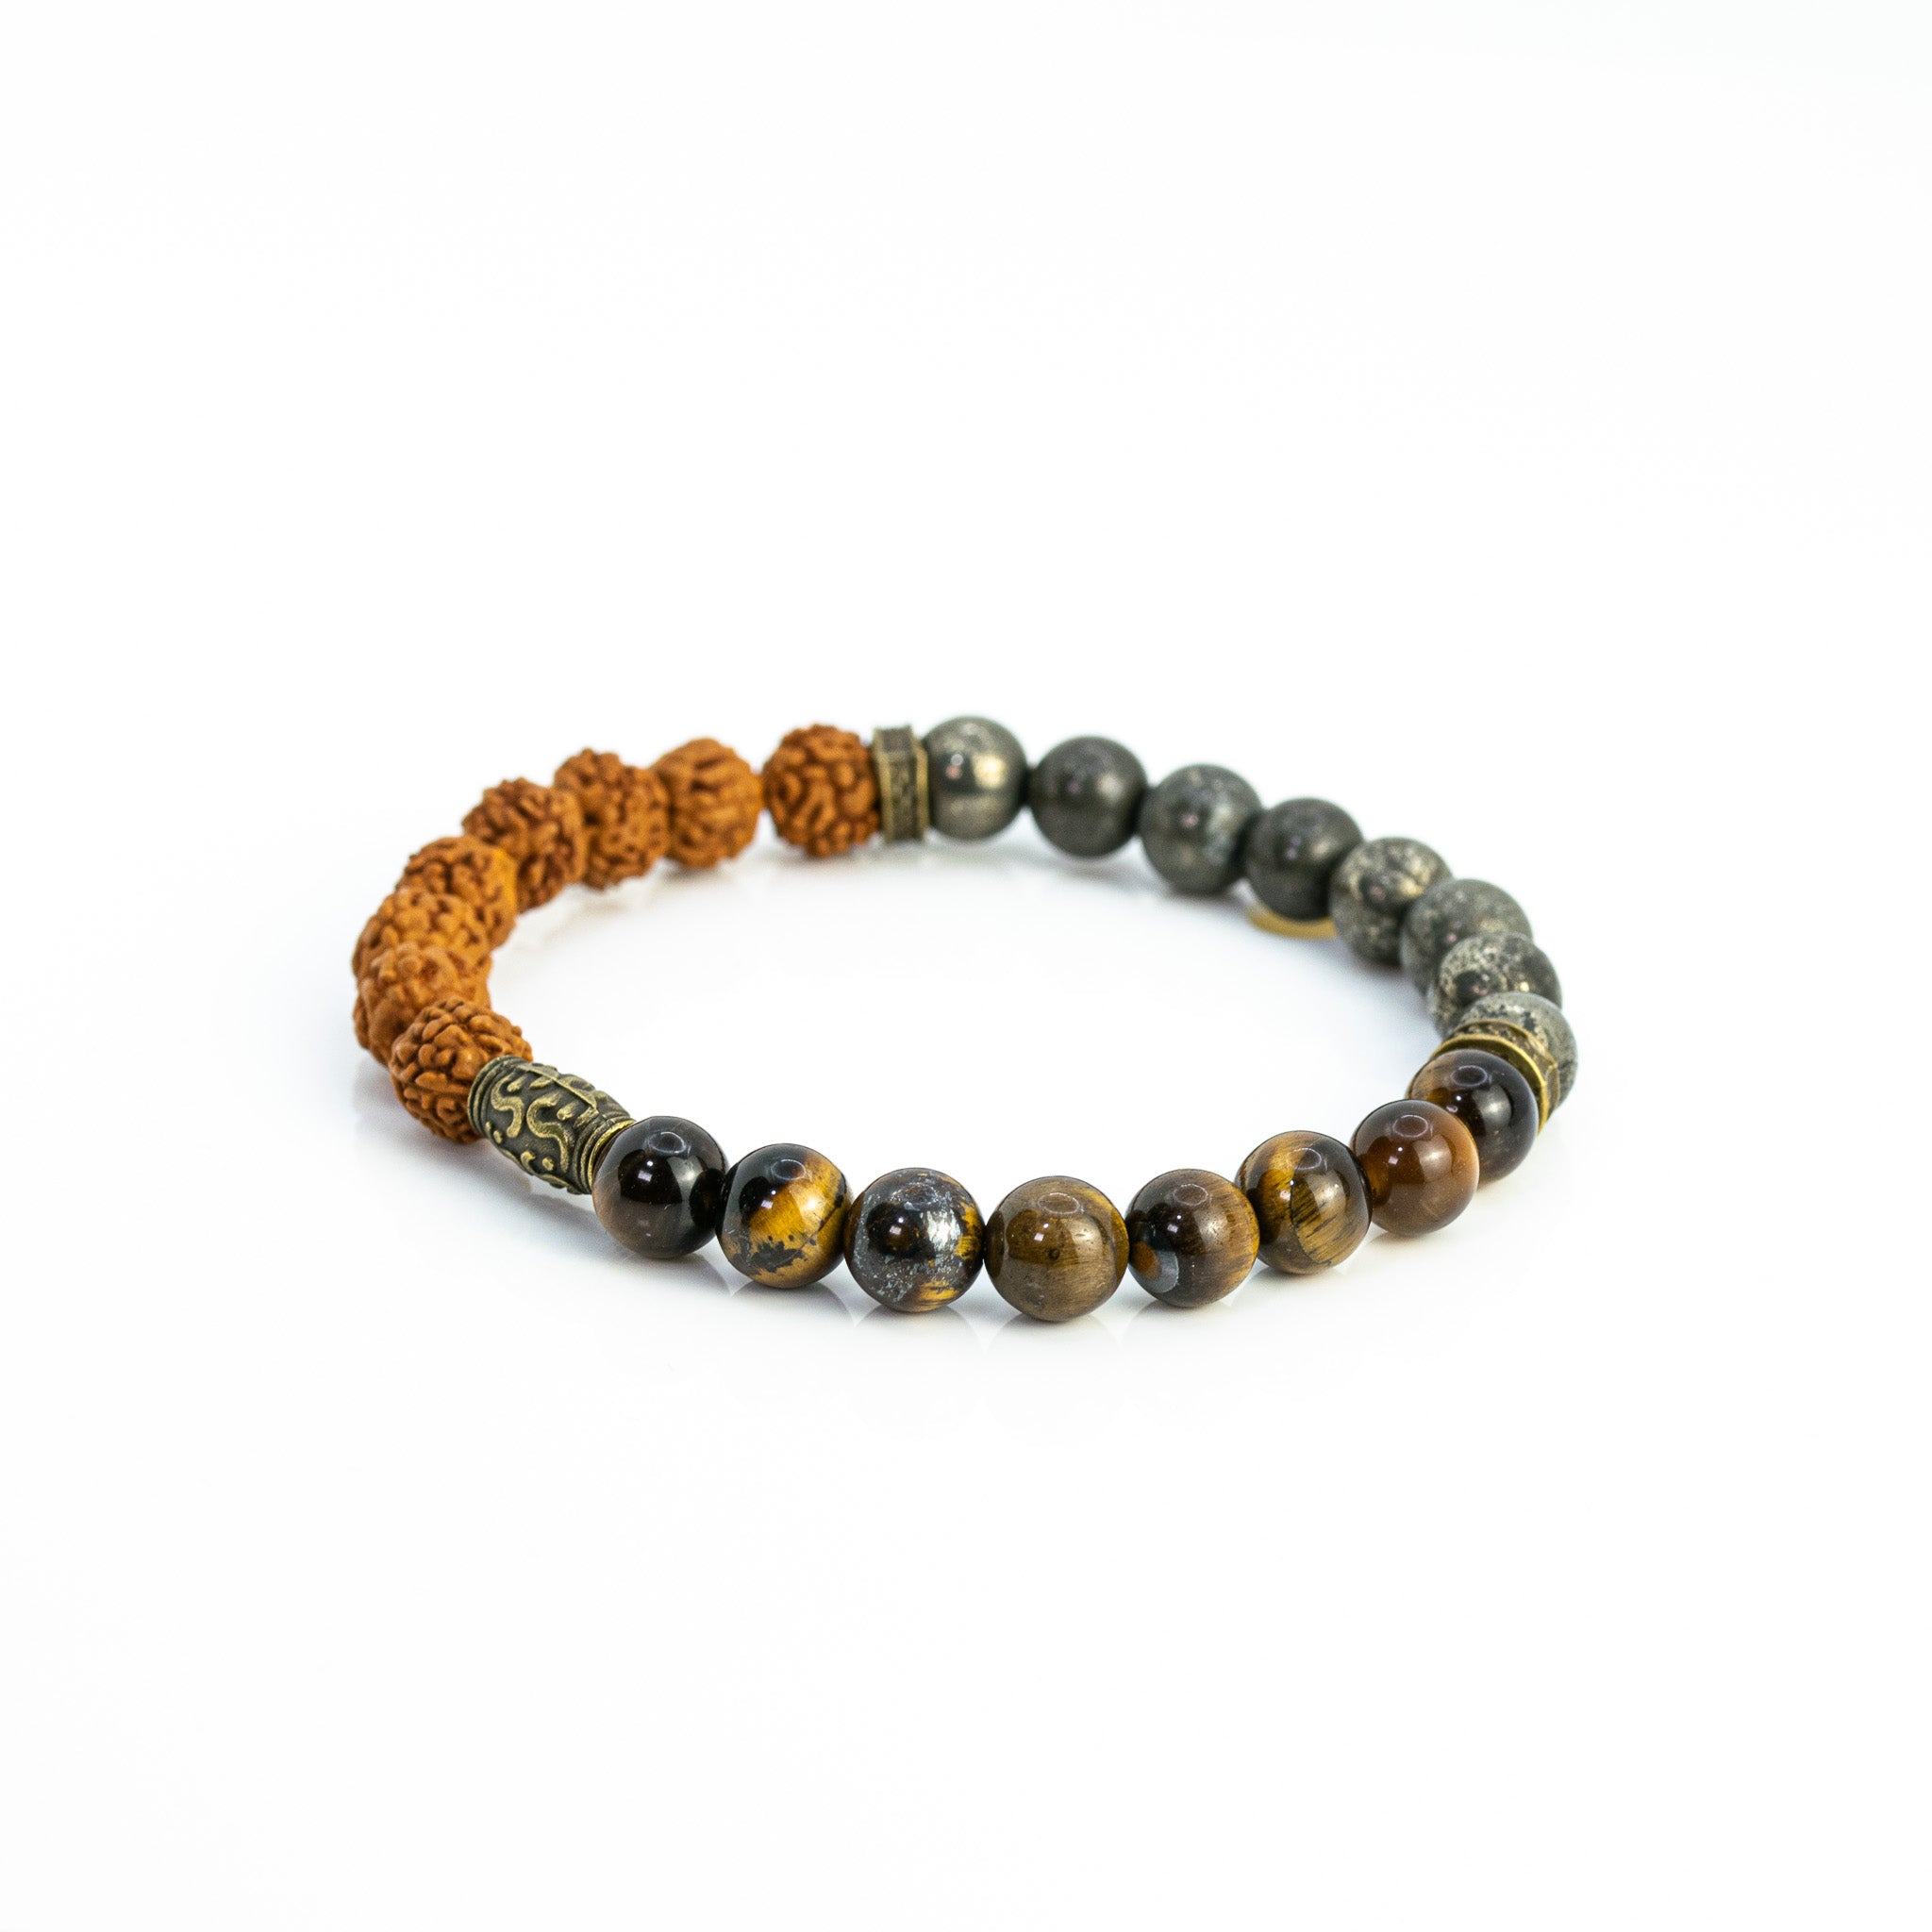 Rudraksh Pyrite and Tiger Eye bracelet for peace, courage and success